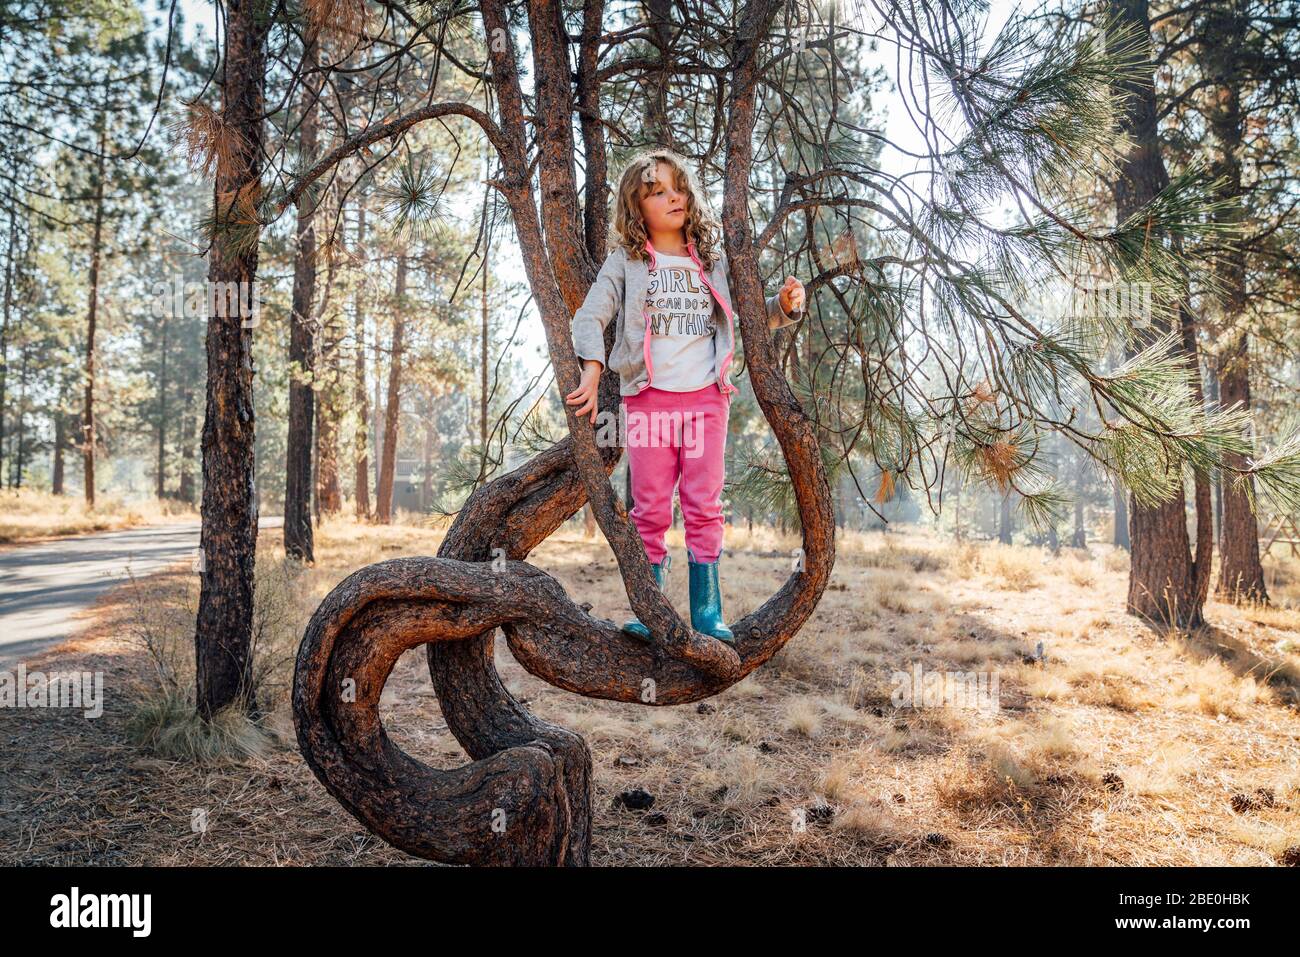 Girl in rubber boots and sweatpants climbing pine tree in forest Stock Photo